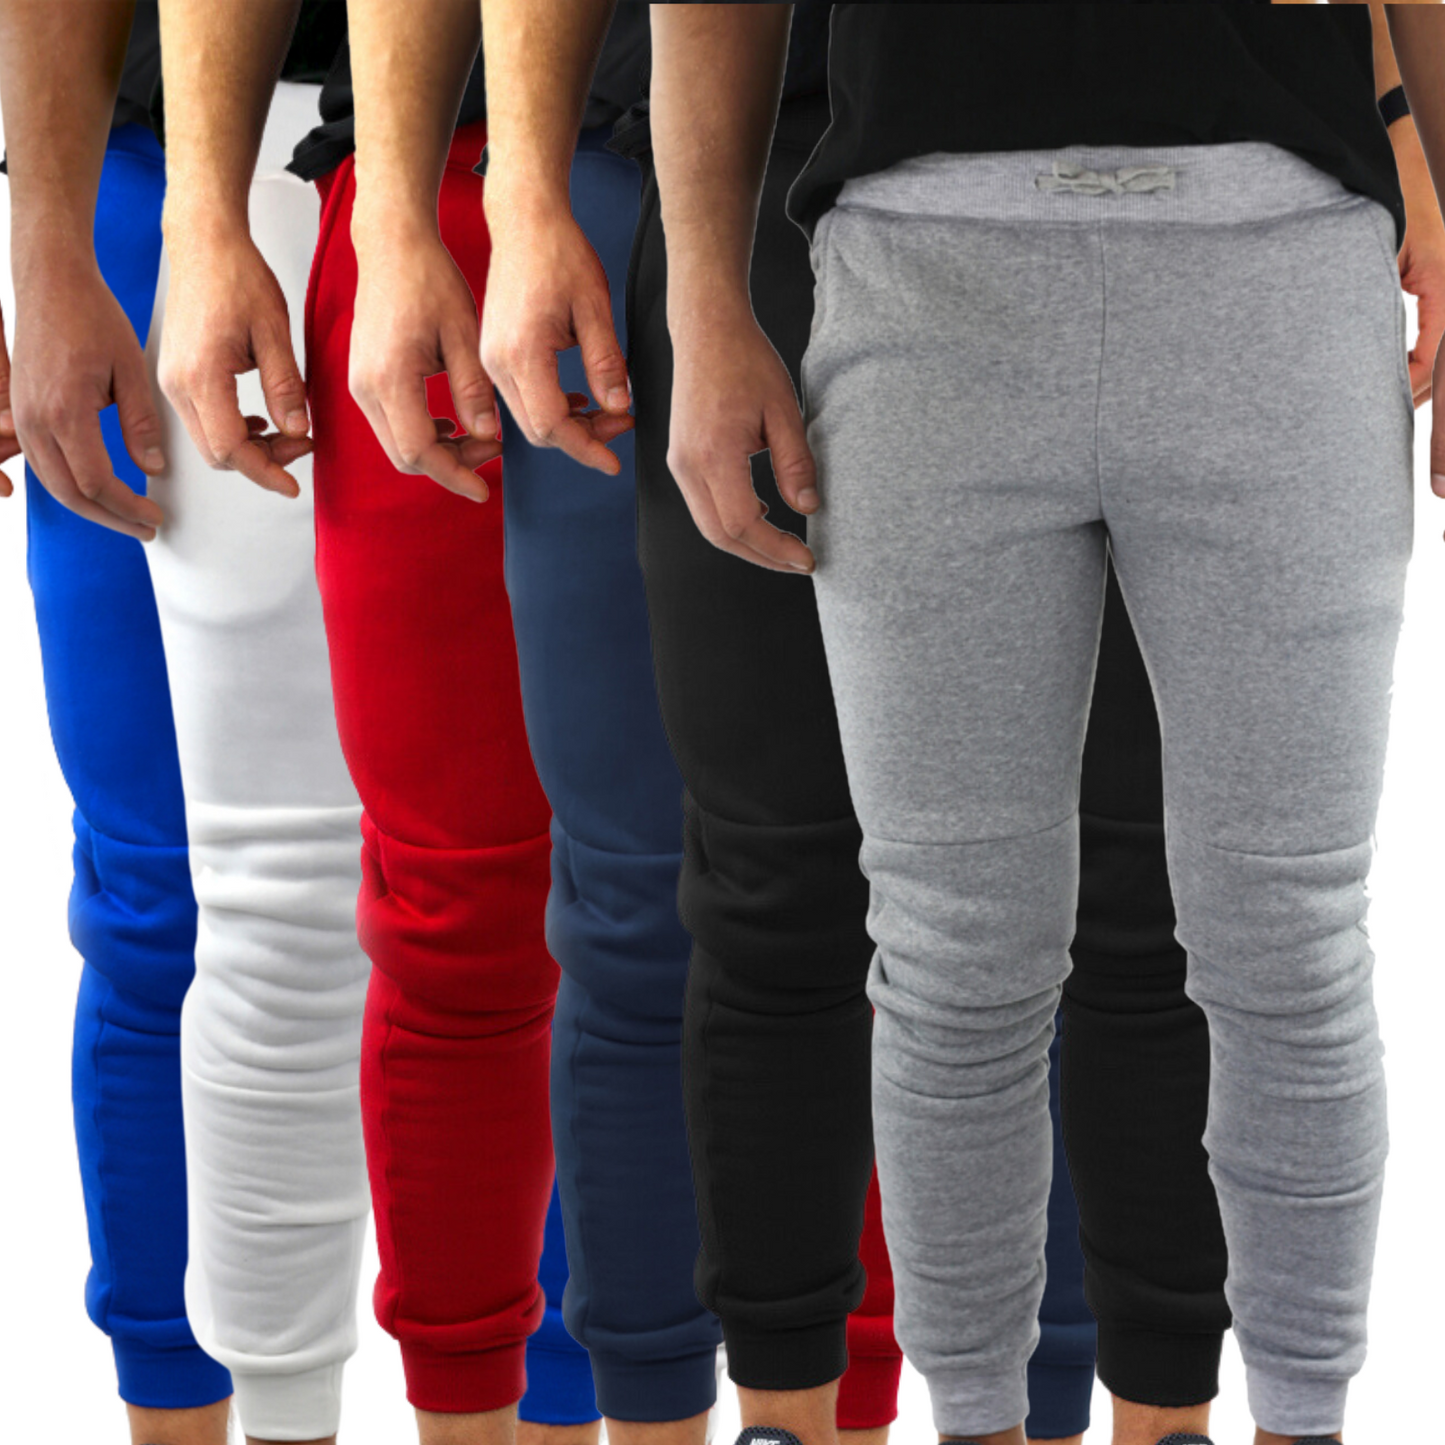 3x Mens Fleece Skinny Track Pants Jogger Gym Casual Sweat Warm - Assorted Colours - M